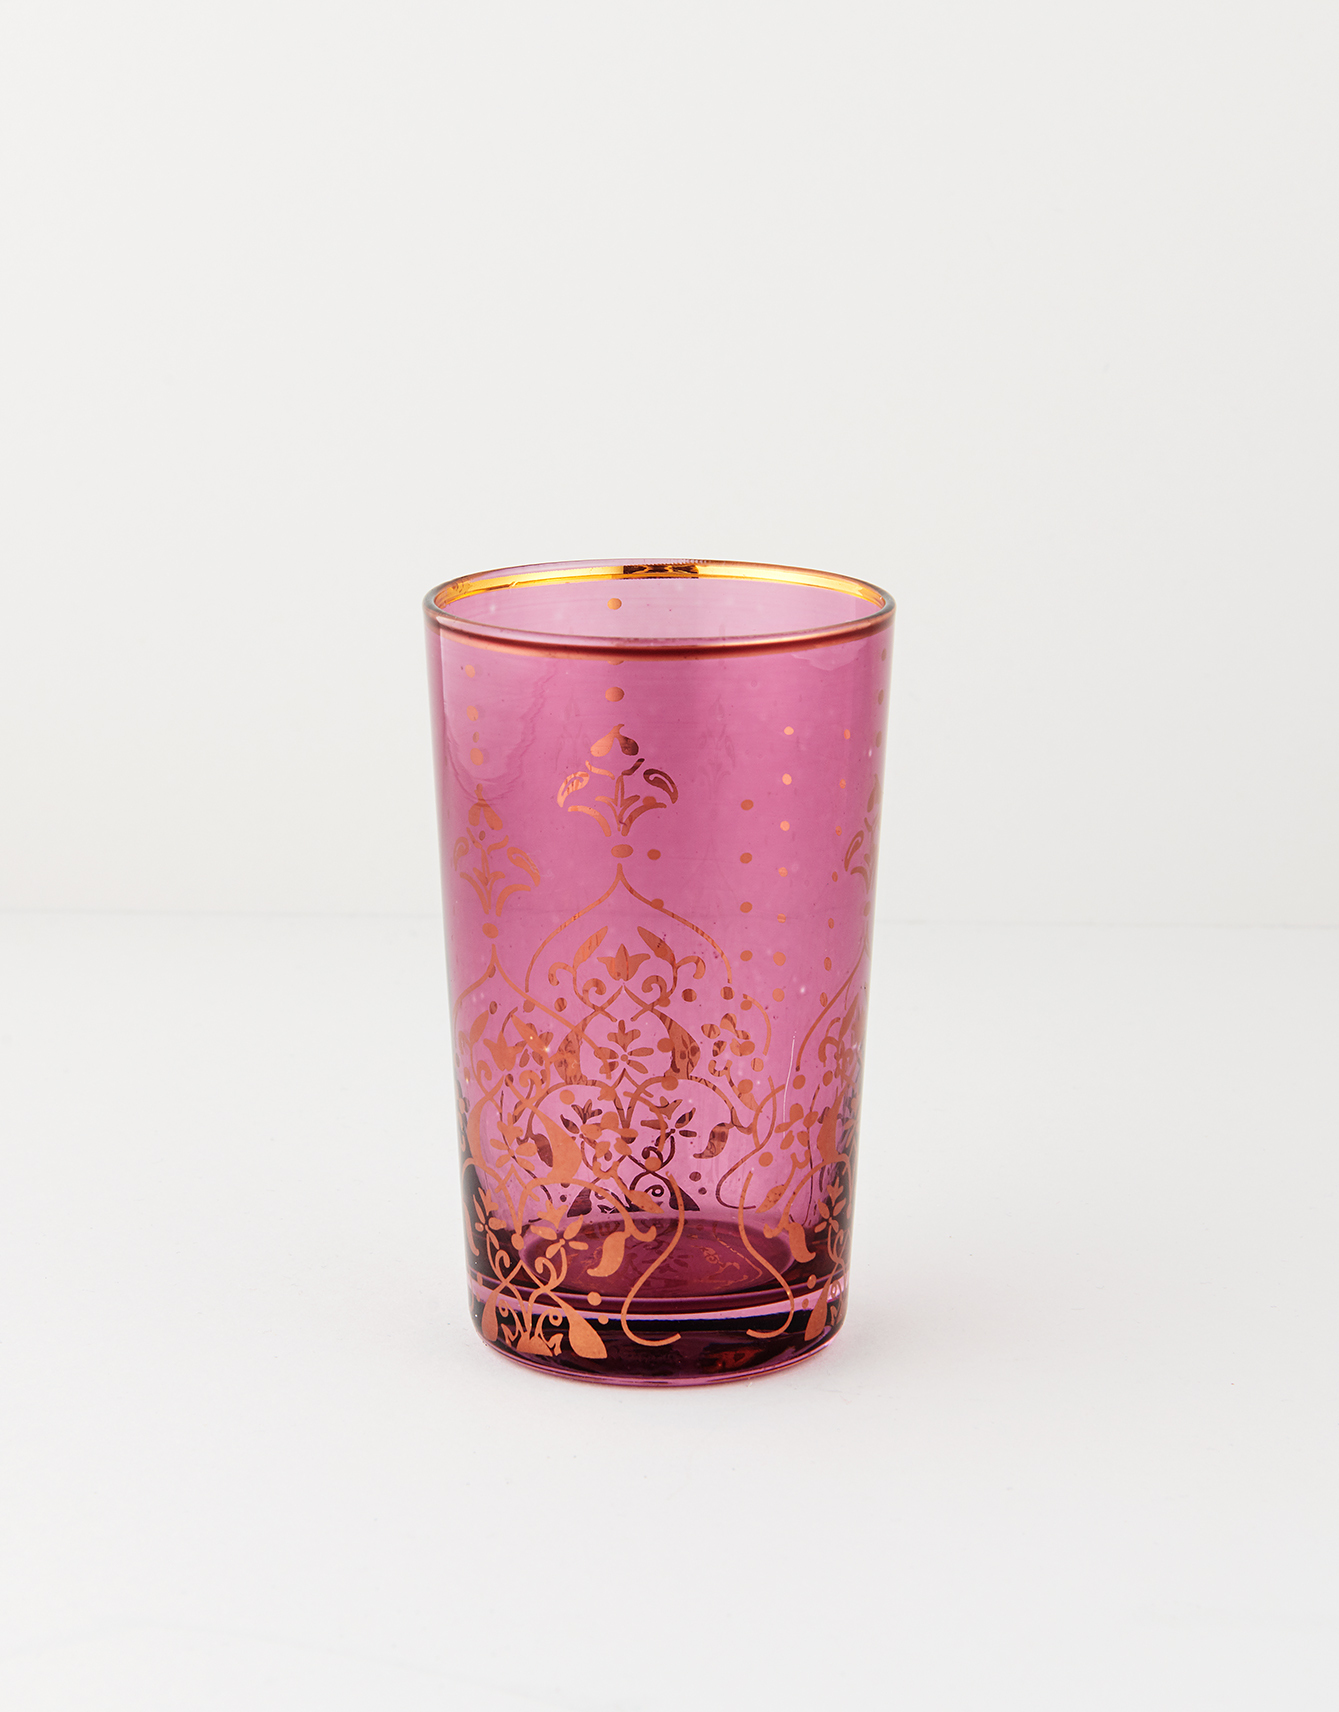 Patterned coloured glass